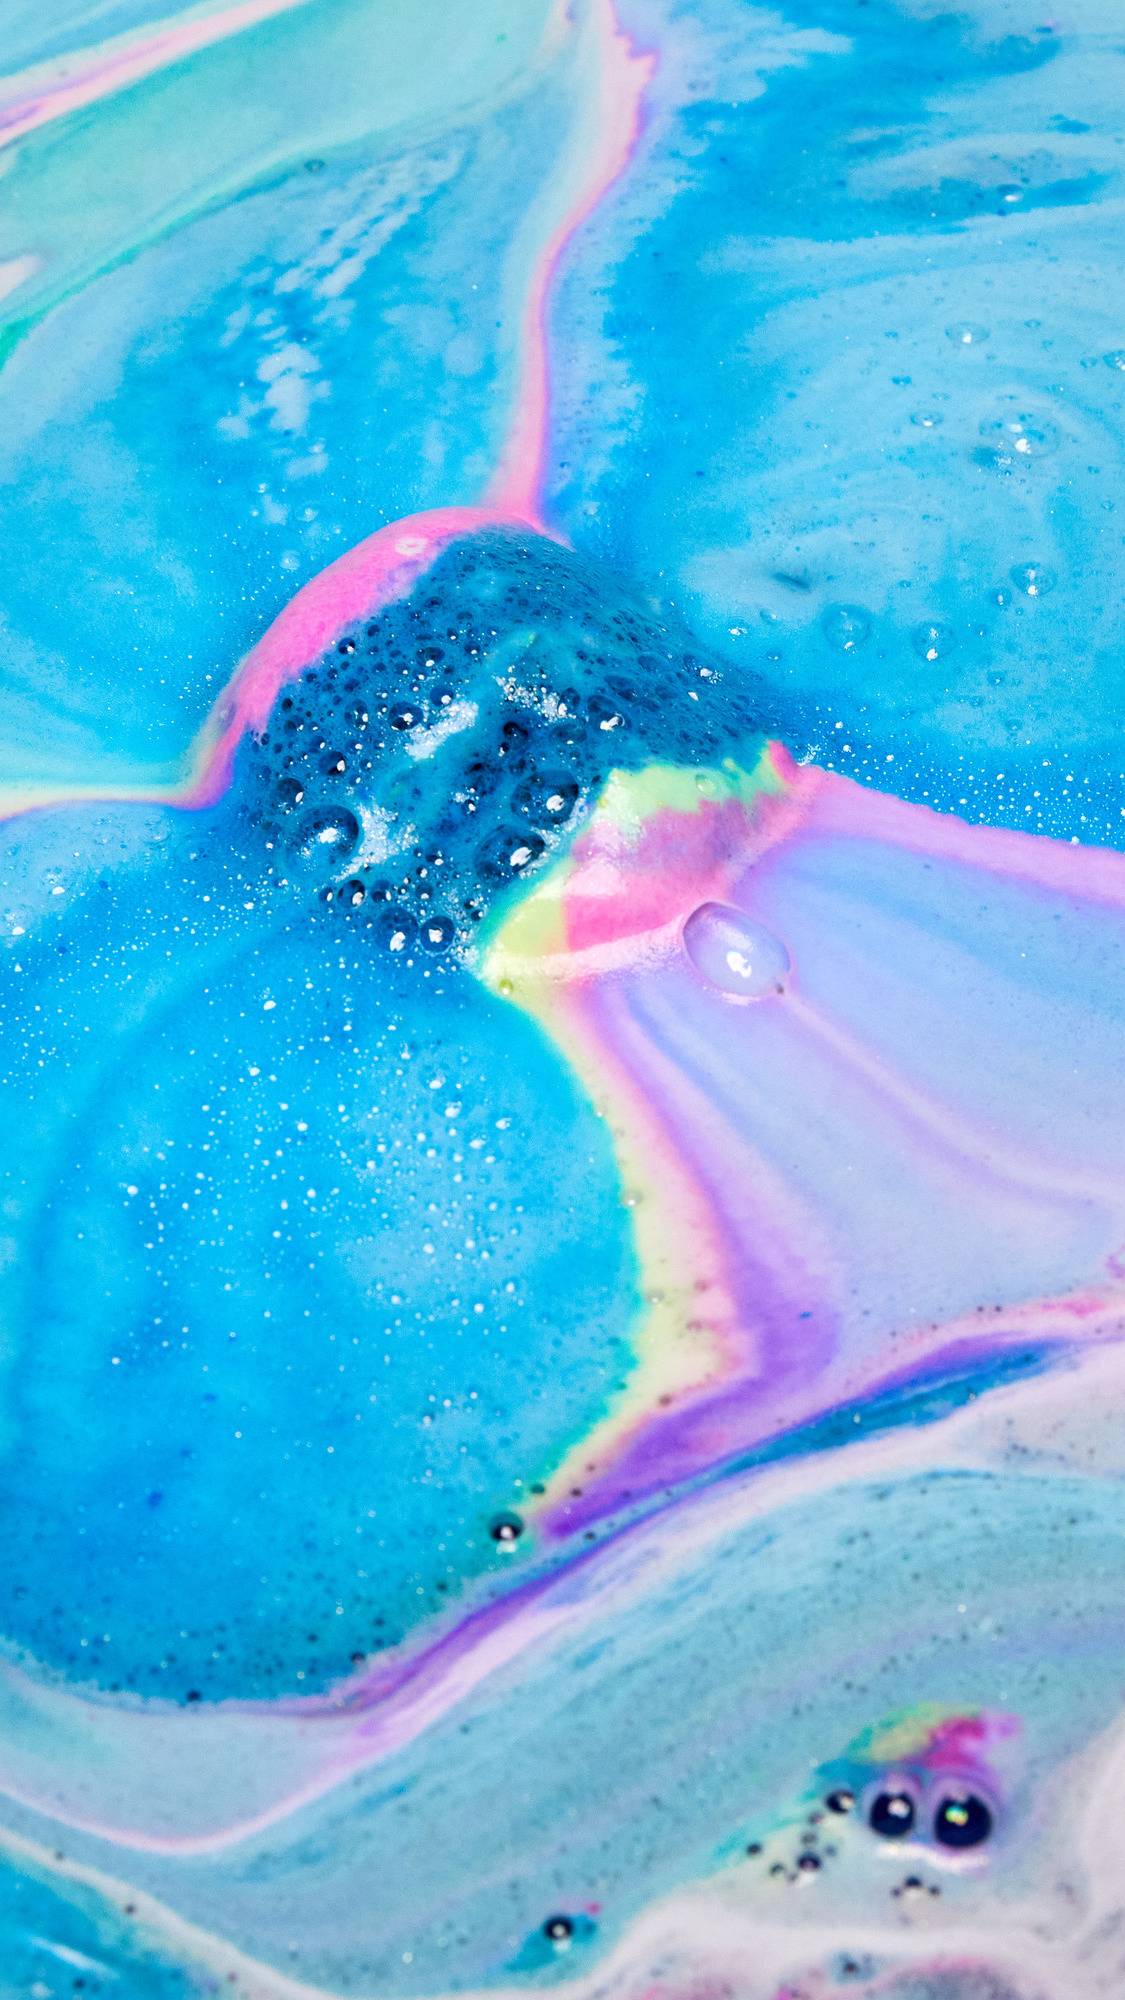 The Giant Intergalactic has been placed in the bath water and is creating a colourful galaxy of blues, purples and pinks.